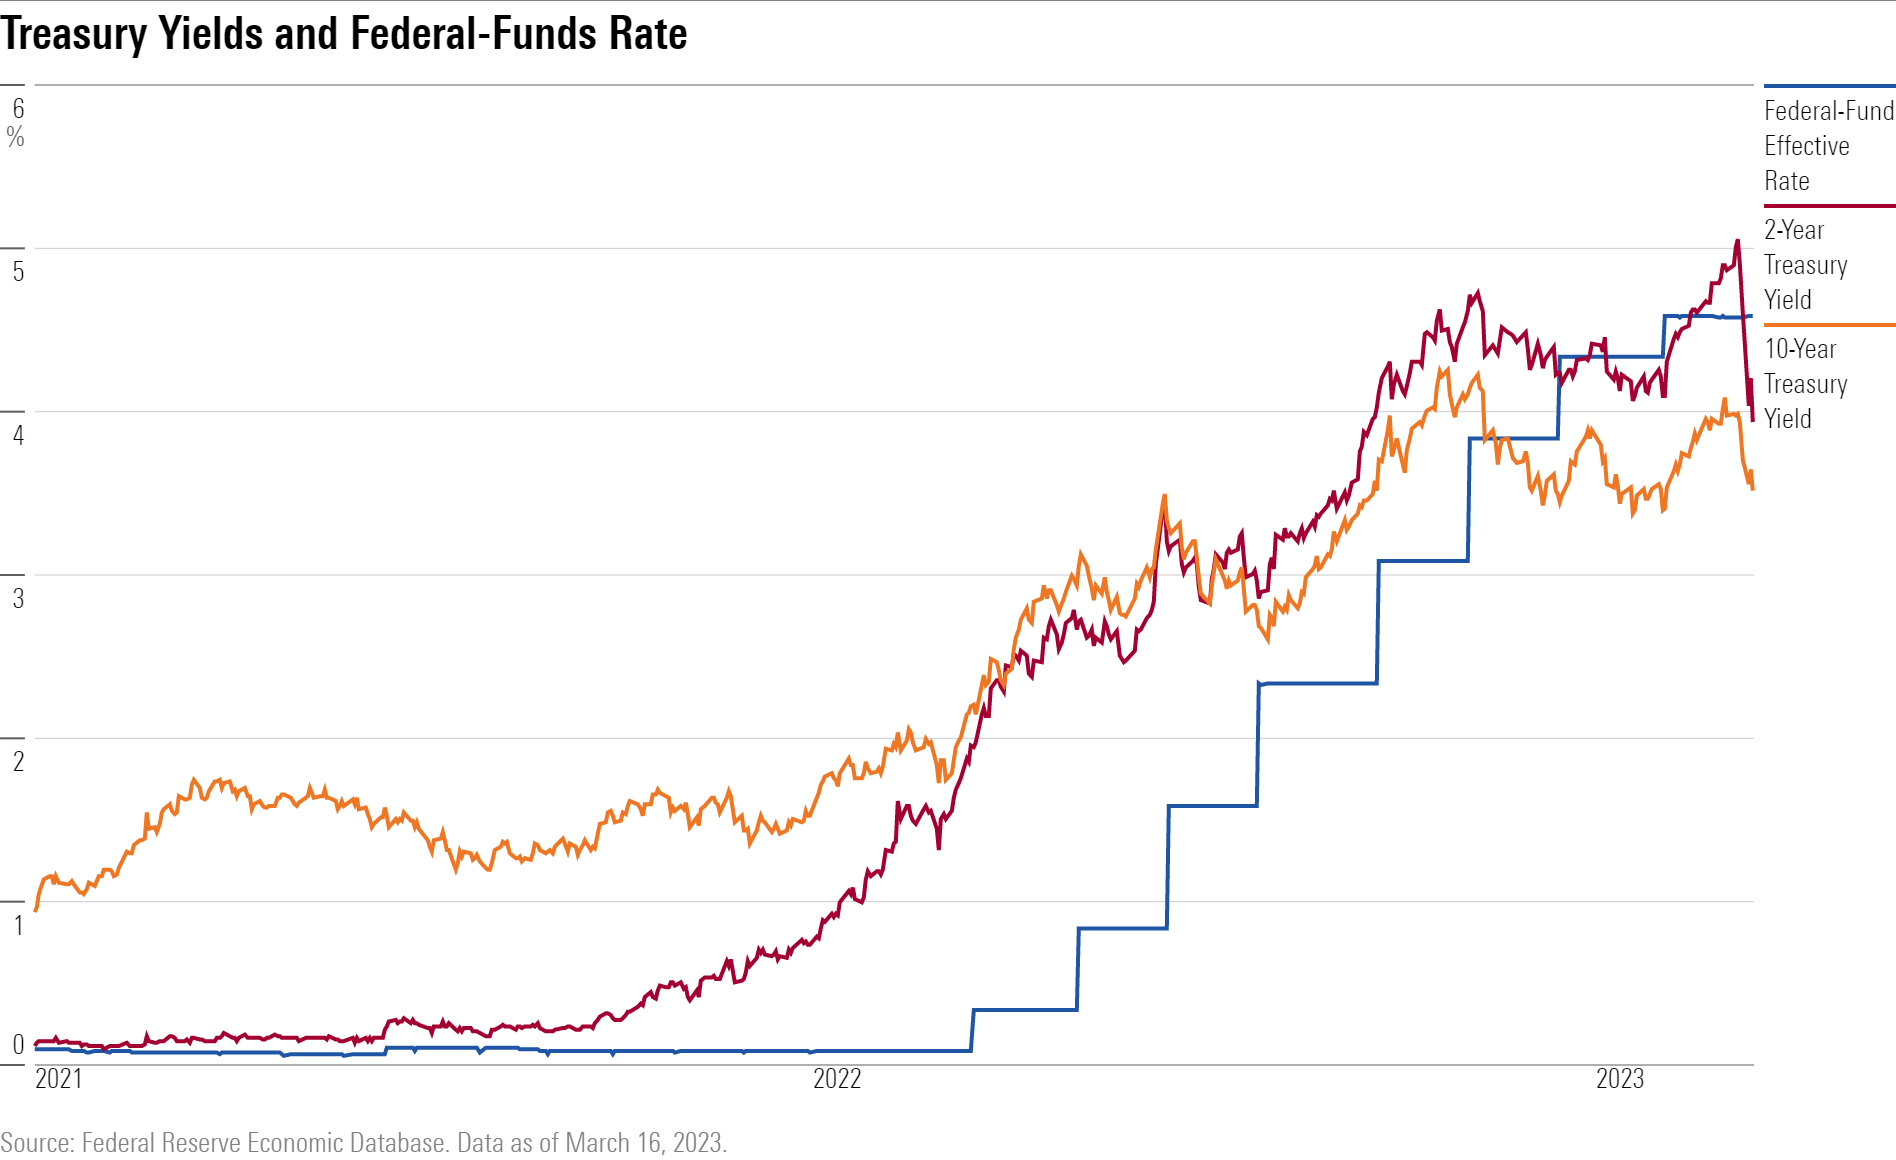 A line chart showing the recent steep decline in 2-year and 10-year U.S. Treasuries compared with the rise in the federal-funds rate in the past year.